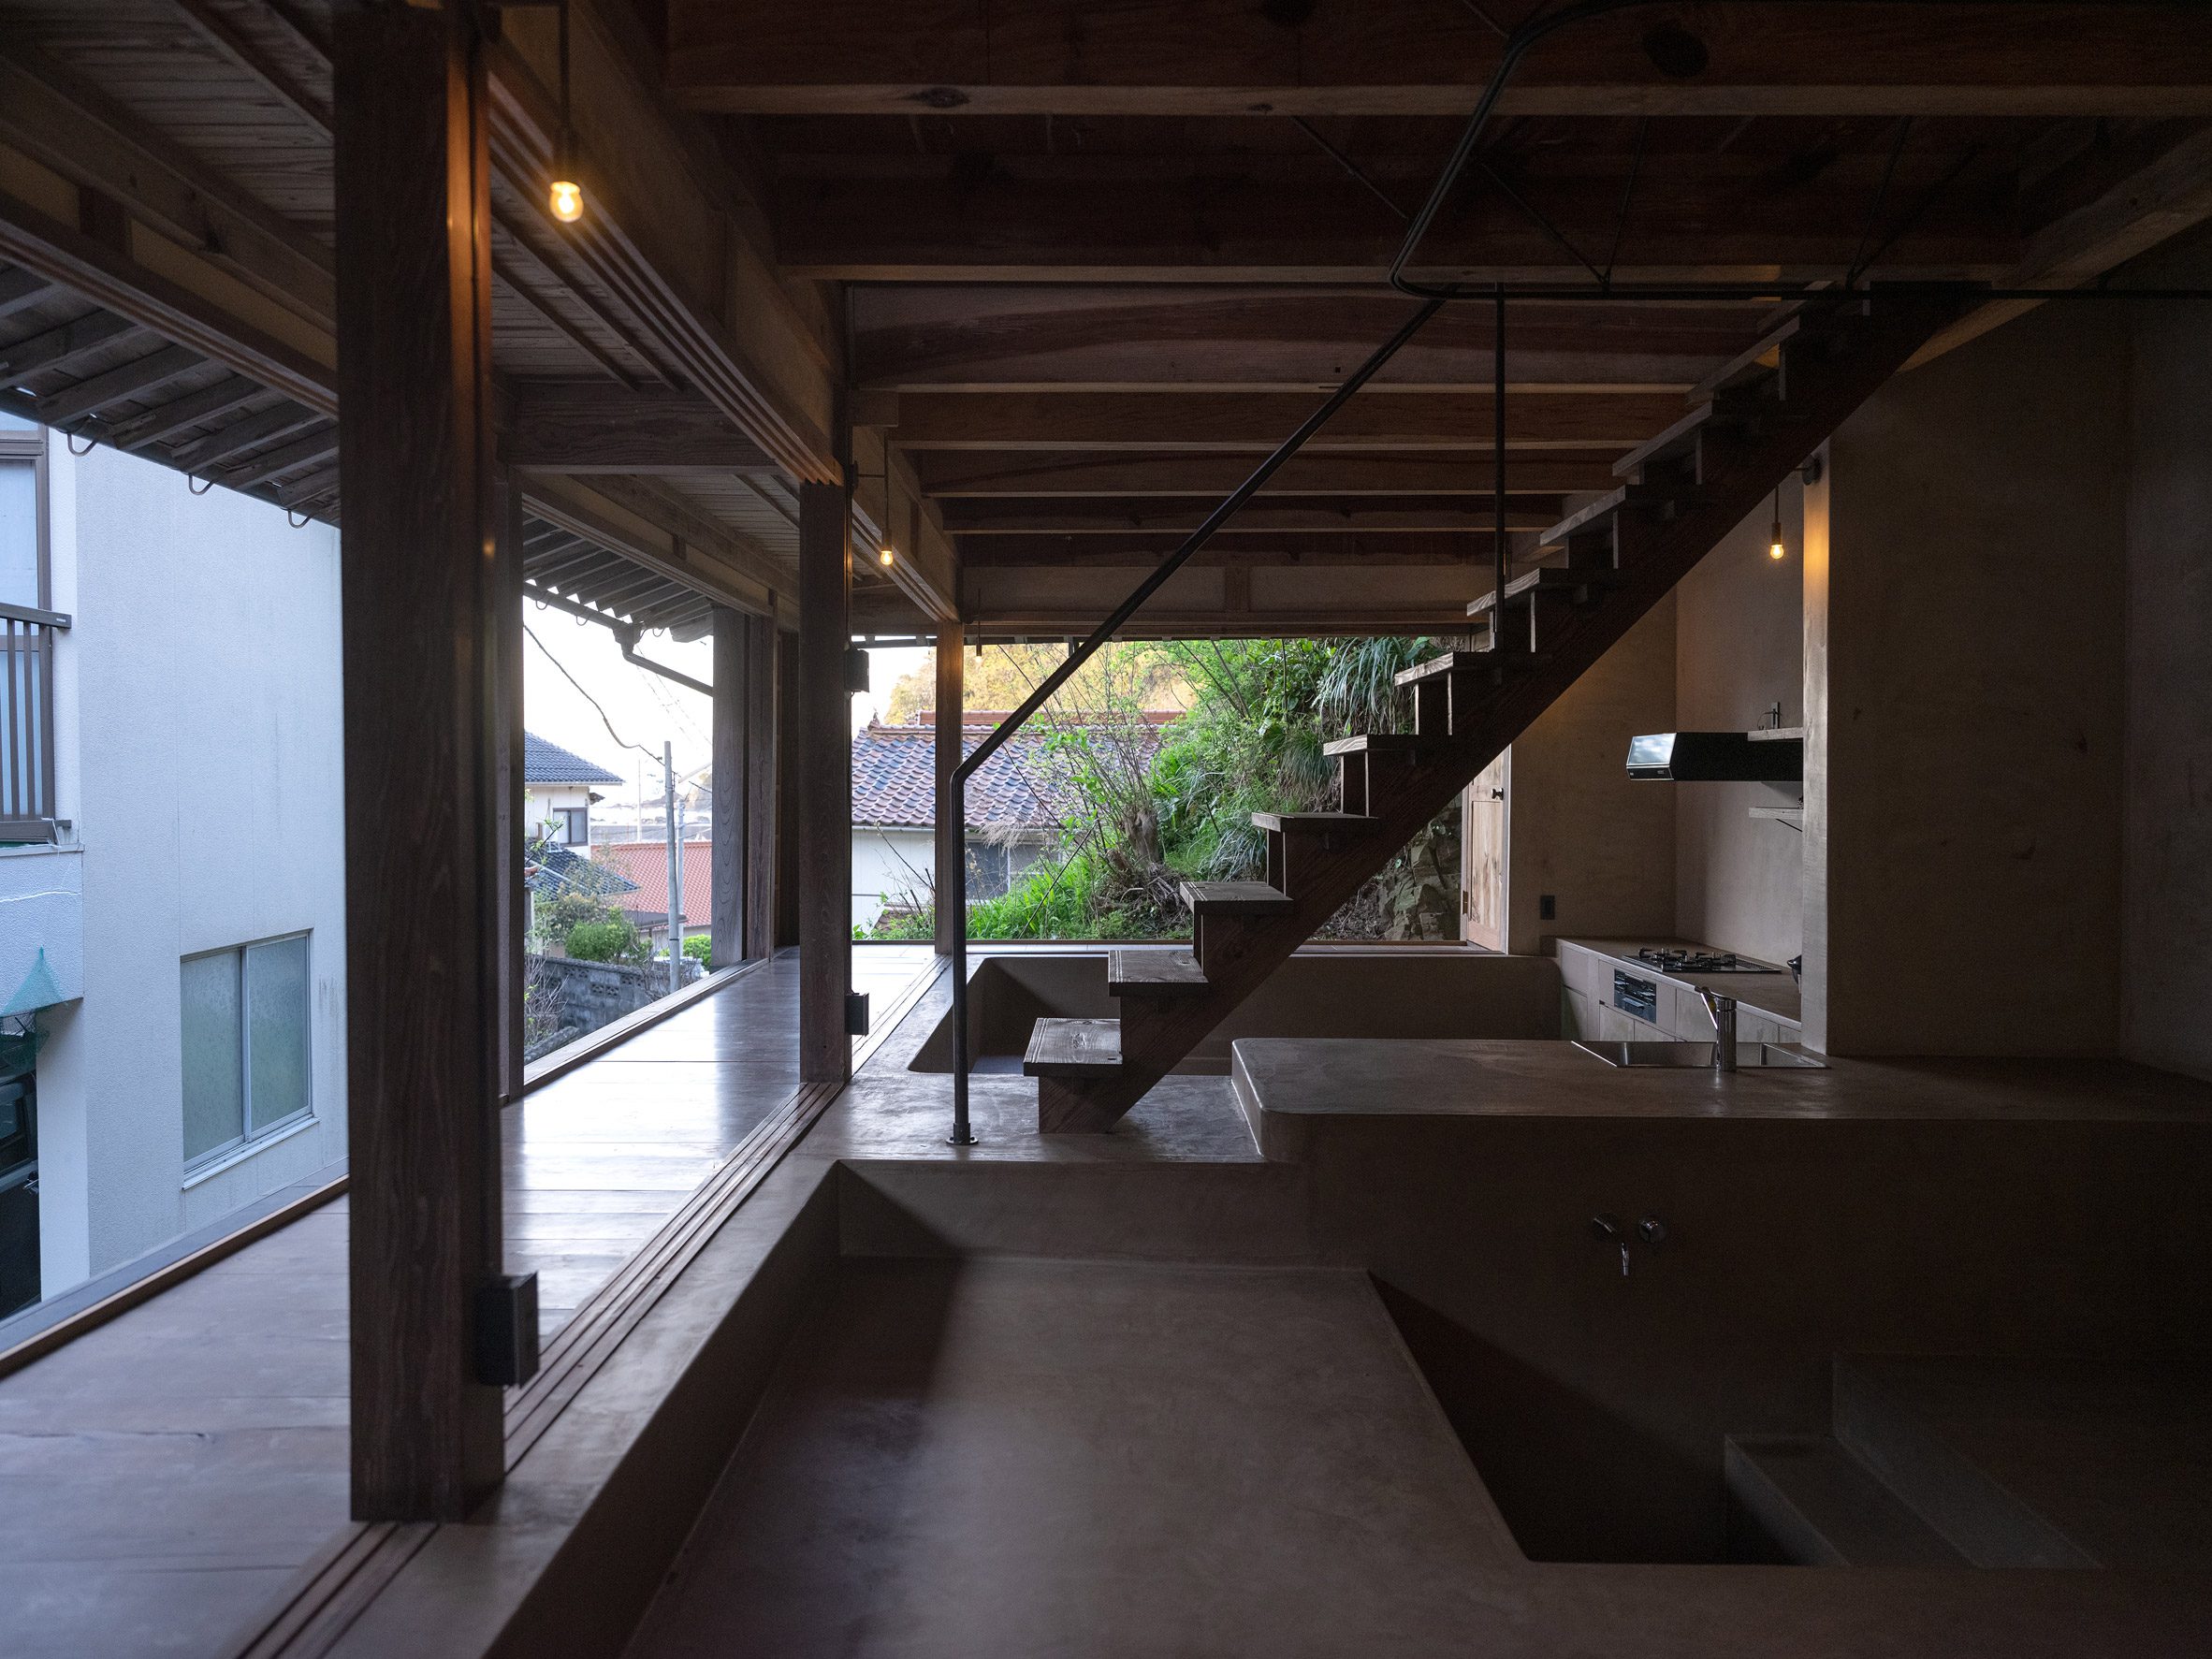 Sunken bathing ares in renovated minimalist home in Misumi, Japan by Studio AMB